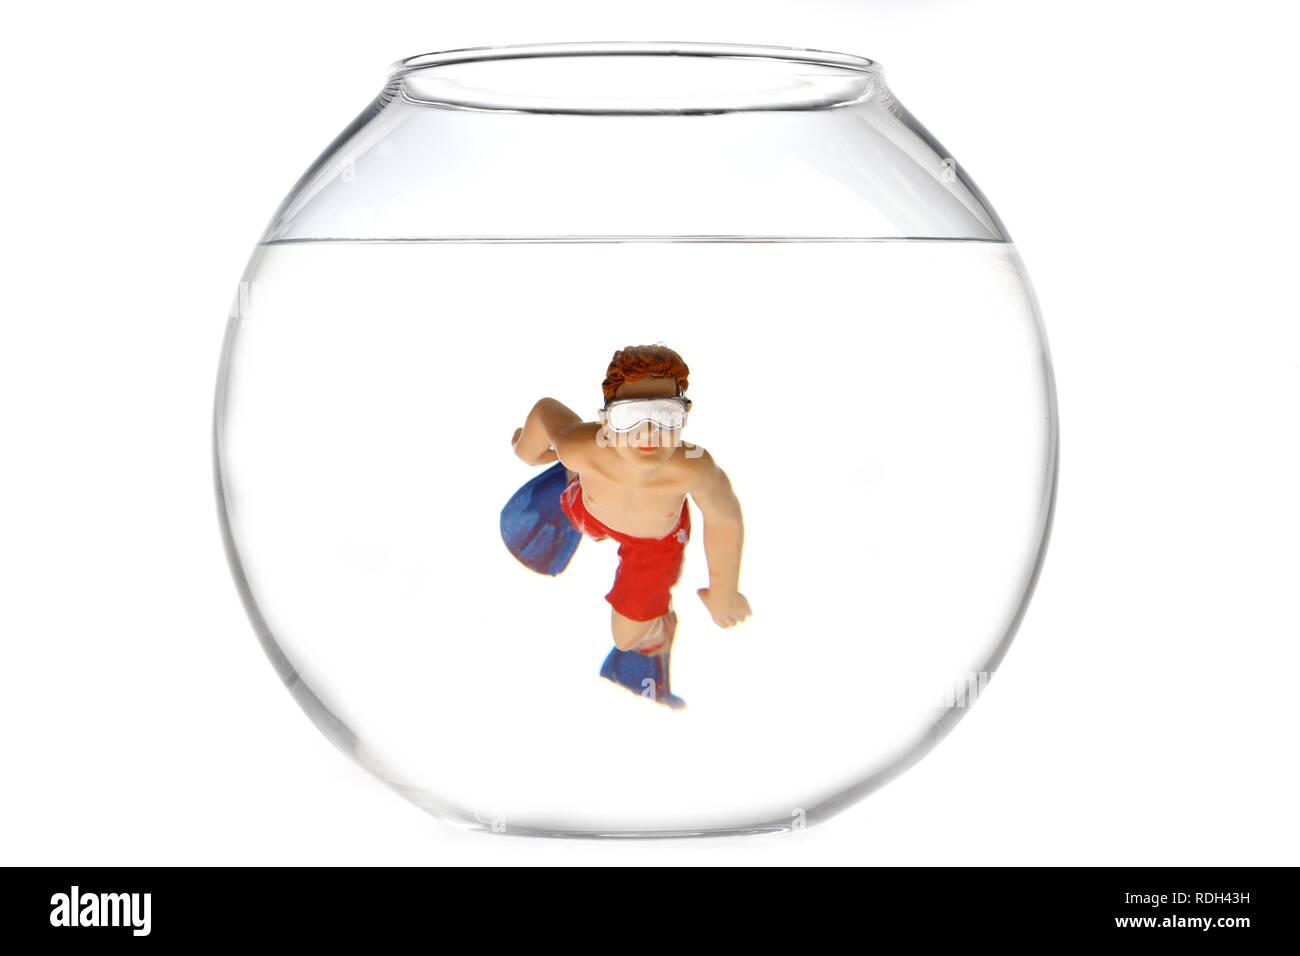 Toy boy swimming with diving goggles and flippers in a fish bowl, illustration Stock Photo